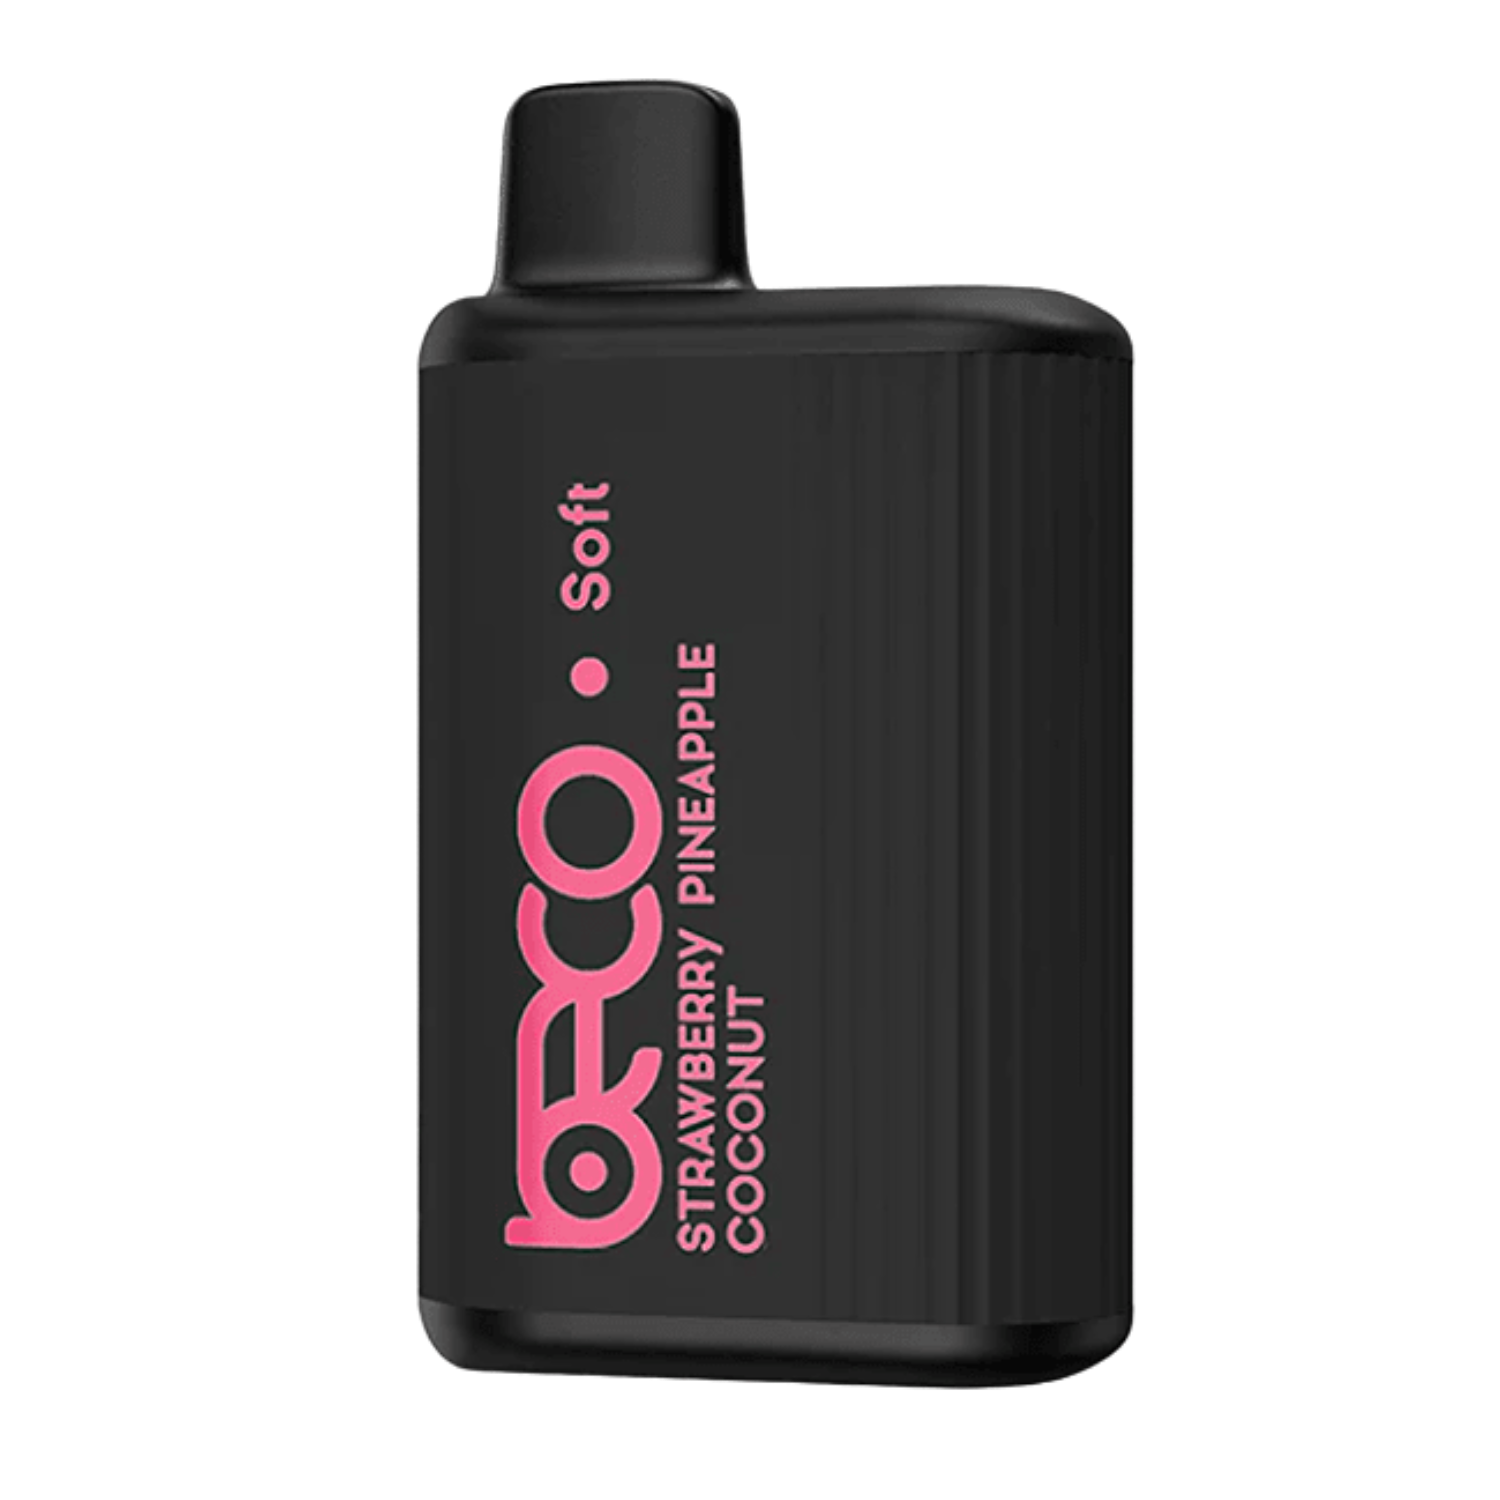 Beco Soft- Strawberry Pineapple Coconut